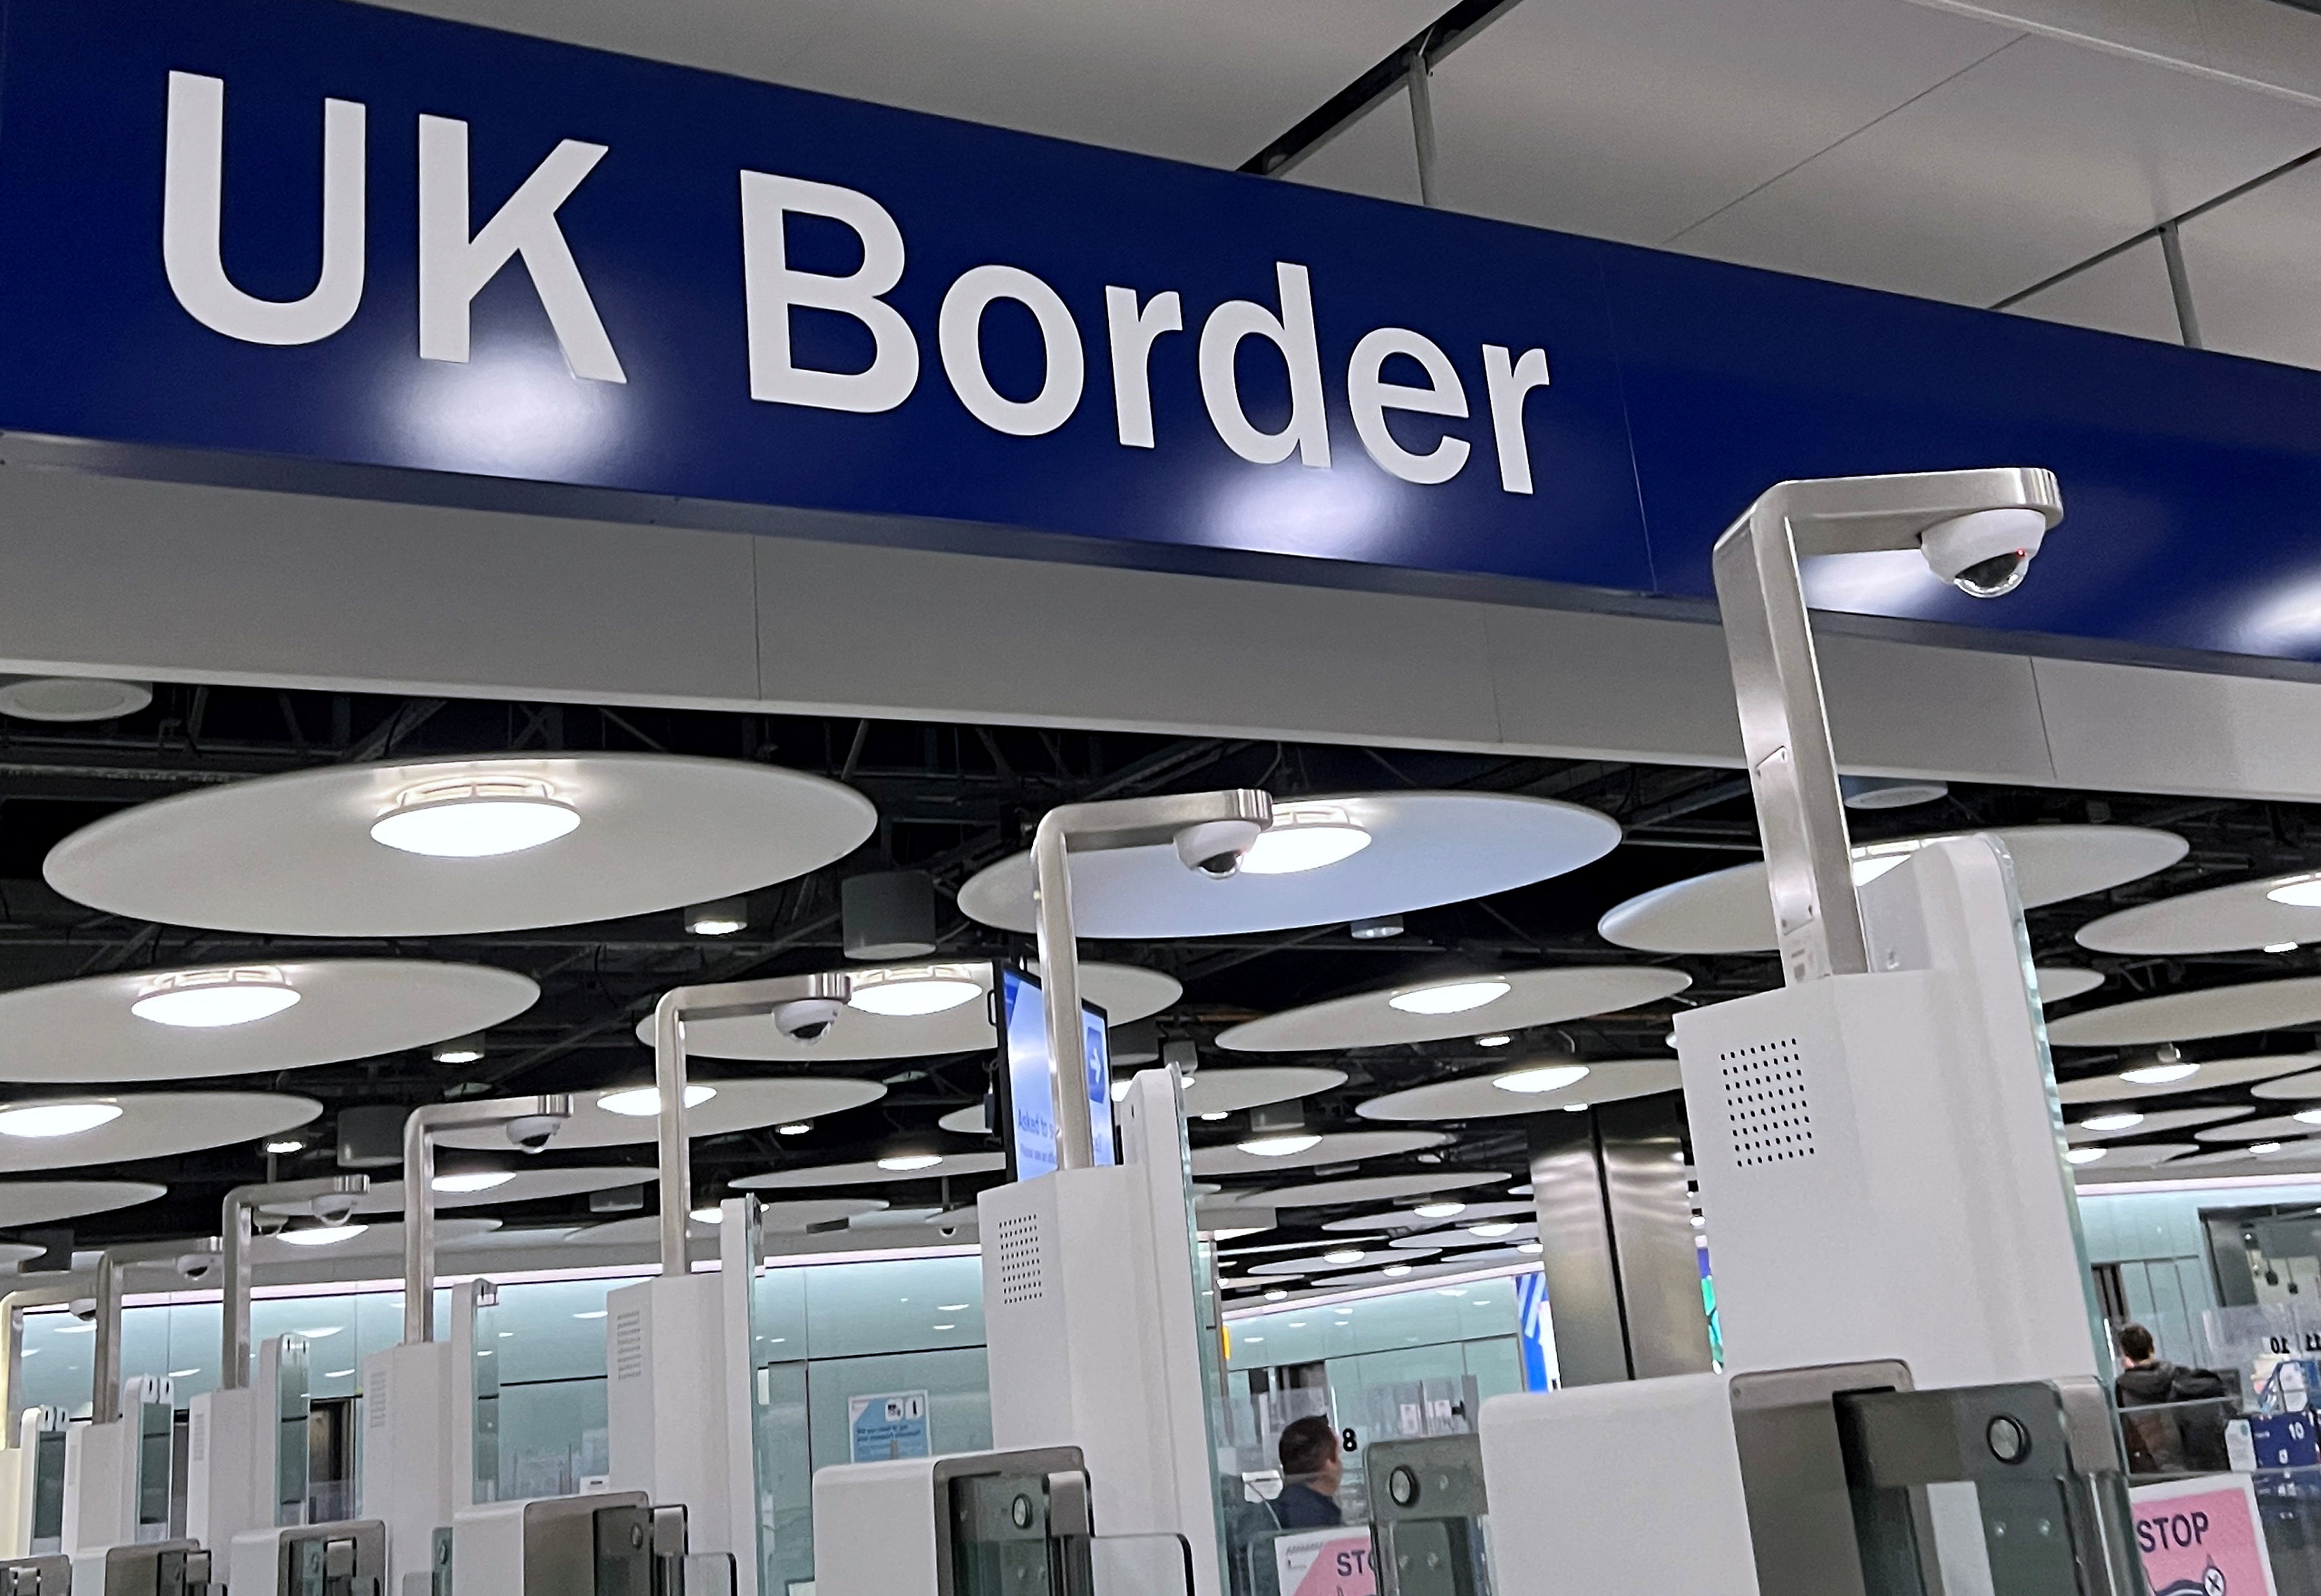 Britain says border e-gates again in service after outage sparked delays